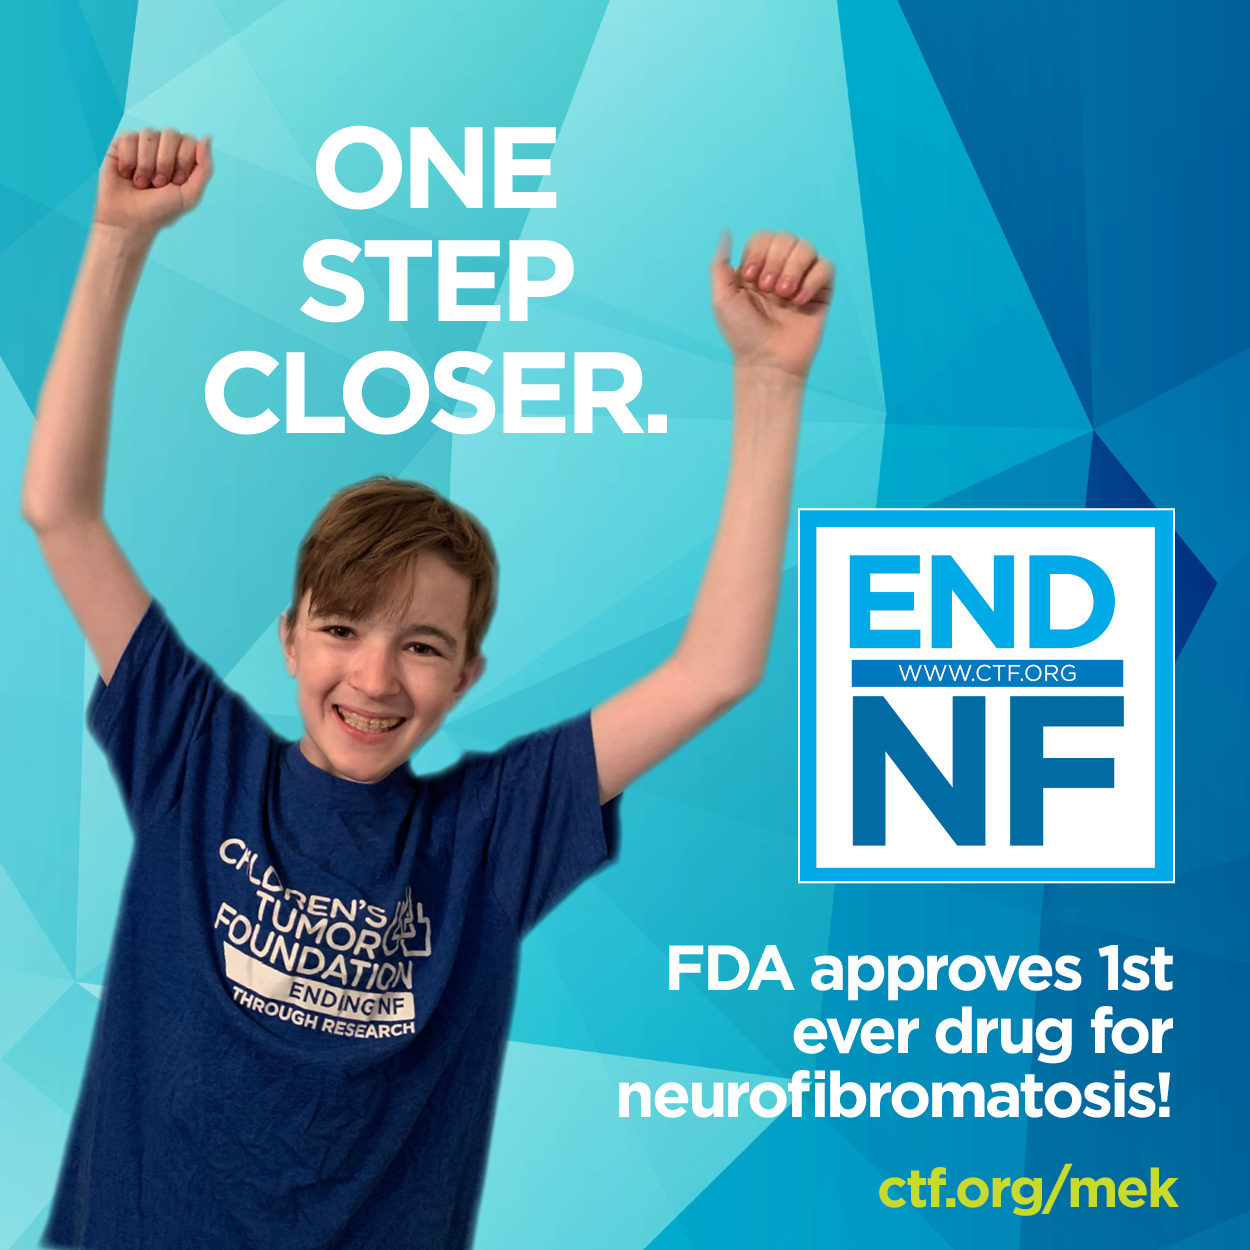 One step closer fda approves first drug for neurofibromatosis.